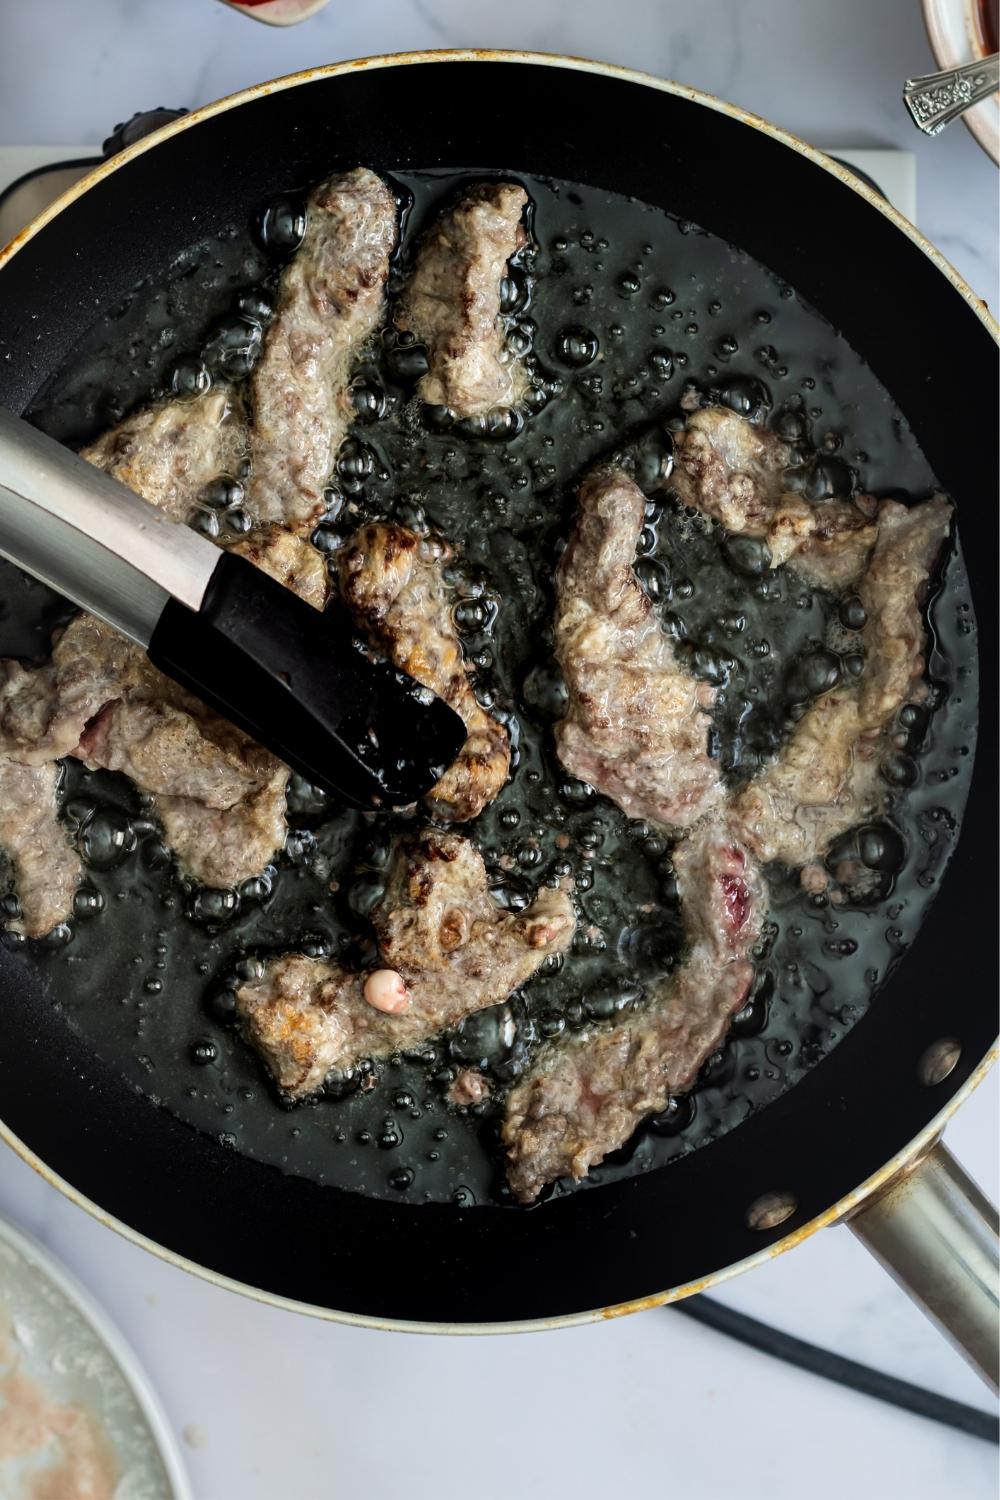 An overhead view of a skillet with hot oil frying sliced beef.